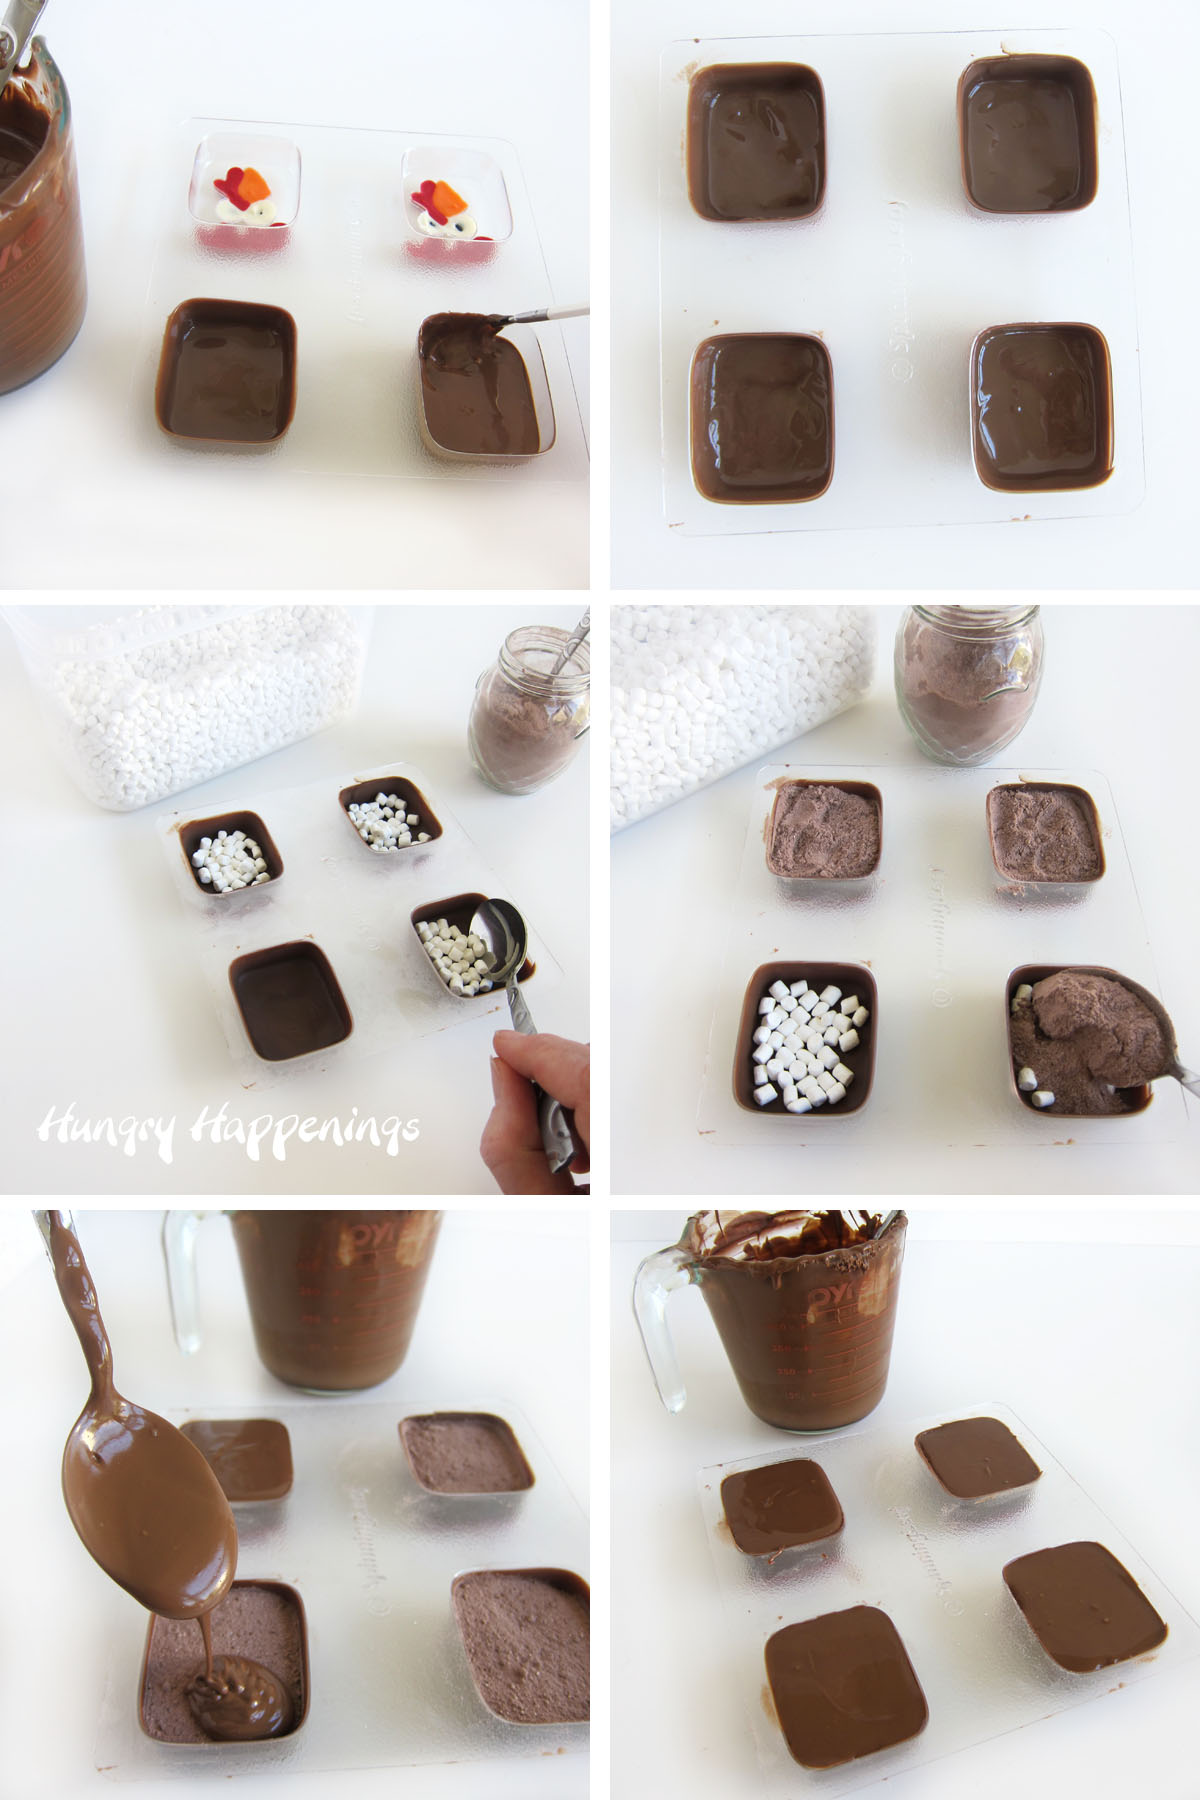 Fill the candy mold with a thick layer of chocolate, then add marshmallows and hot cocoa mix before covering with more chocolate.